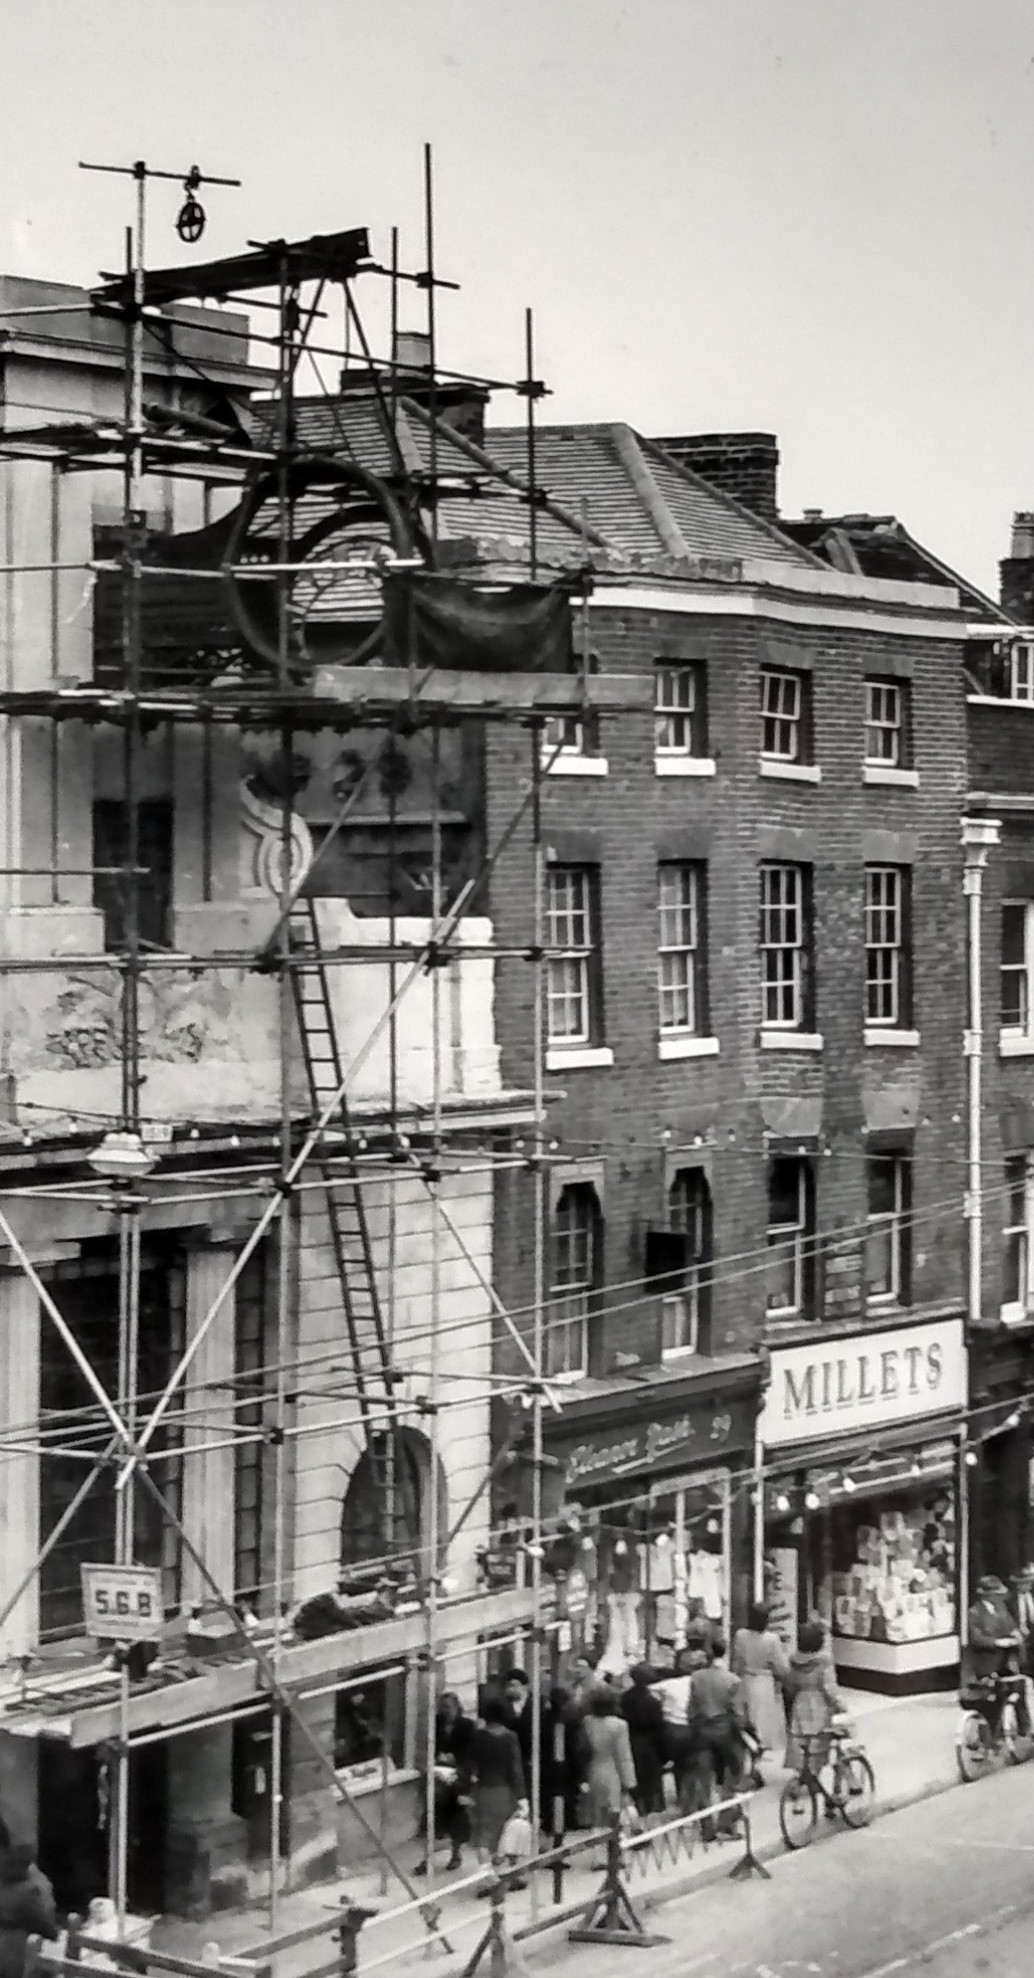 In 1951 Richard Padmore’s famous clock had to be taken down for repair, paid for by the Hardy and Padmore company. Do you remember when Millets, John Lunn and Turners were in Worcester High Street?